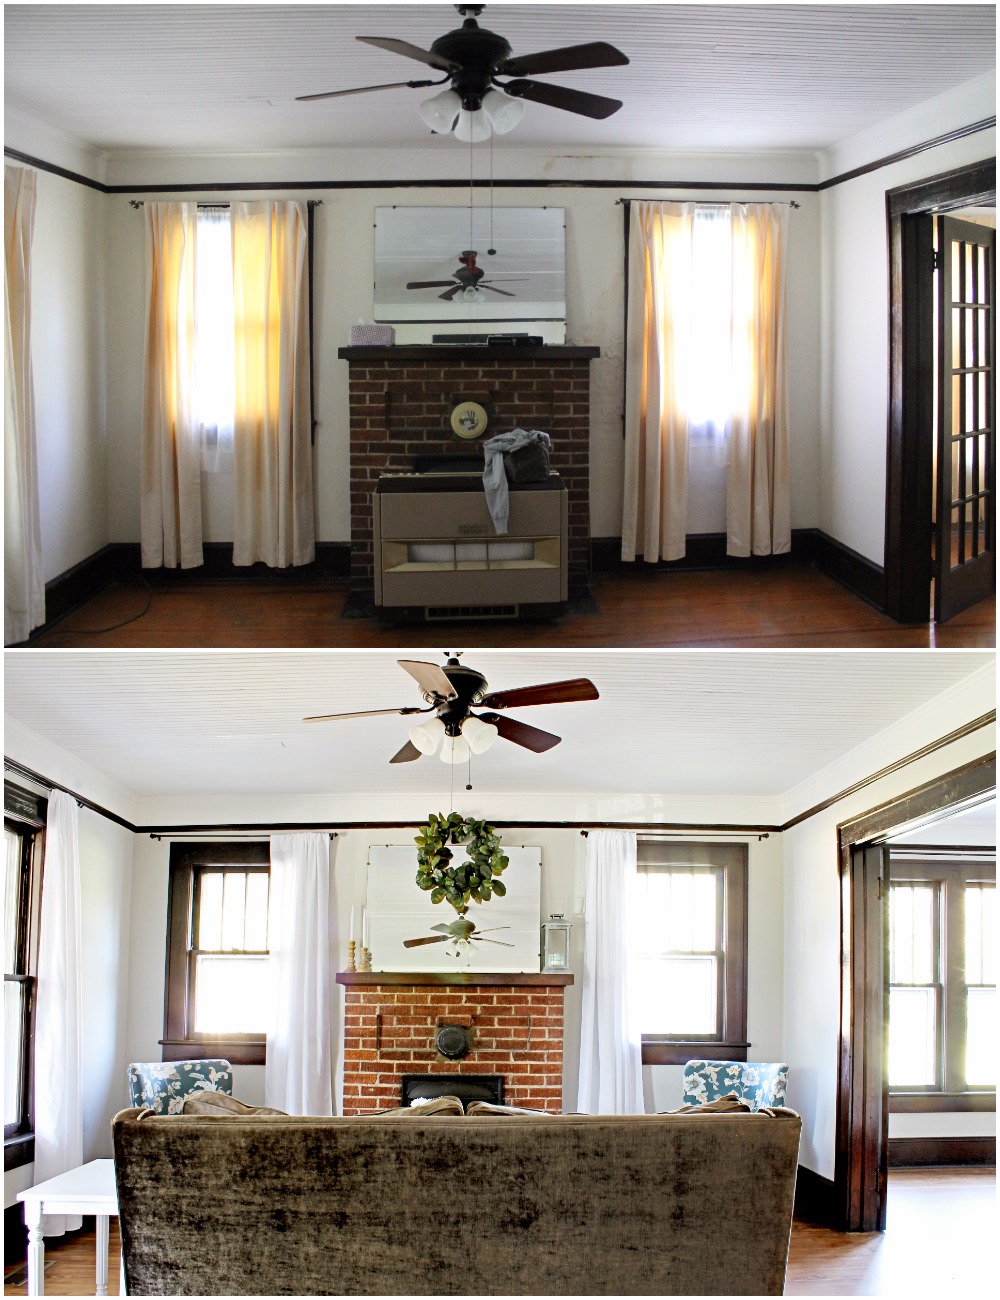 House Flipping Before and Afters - Living Room Budget Renovation Remodel, Wood Trim Paint Colors - Sherwin Williams Repose Gray (1).jpg